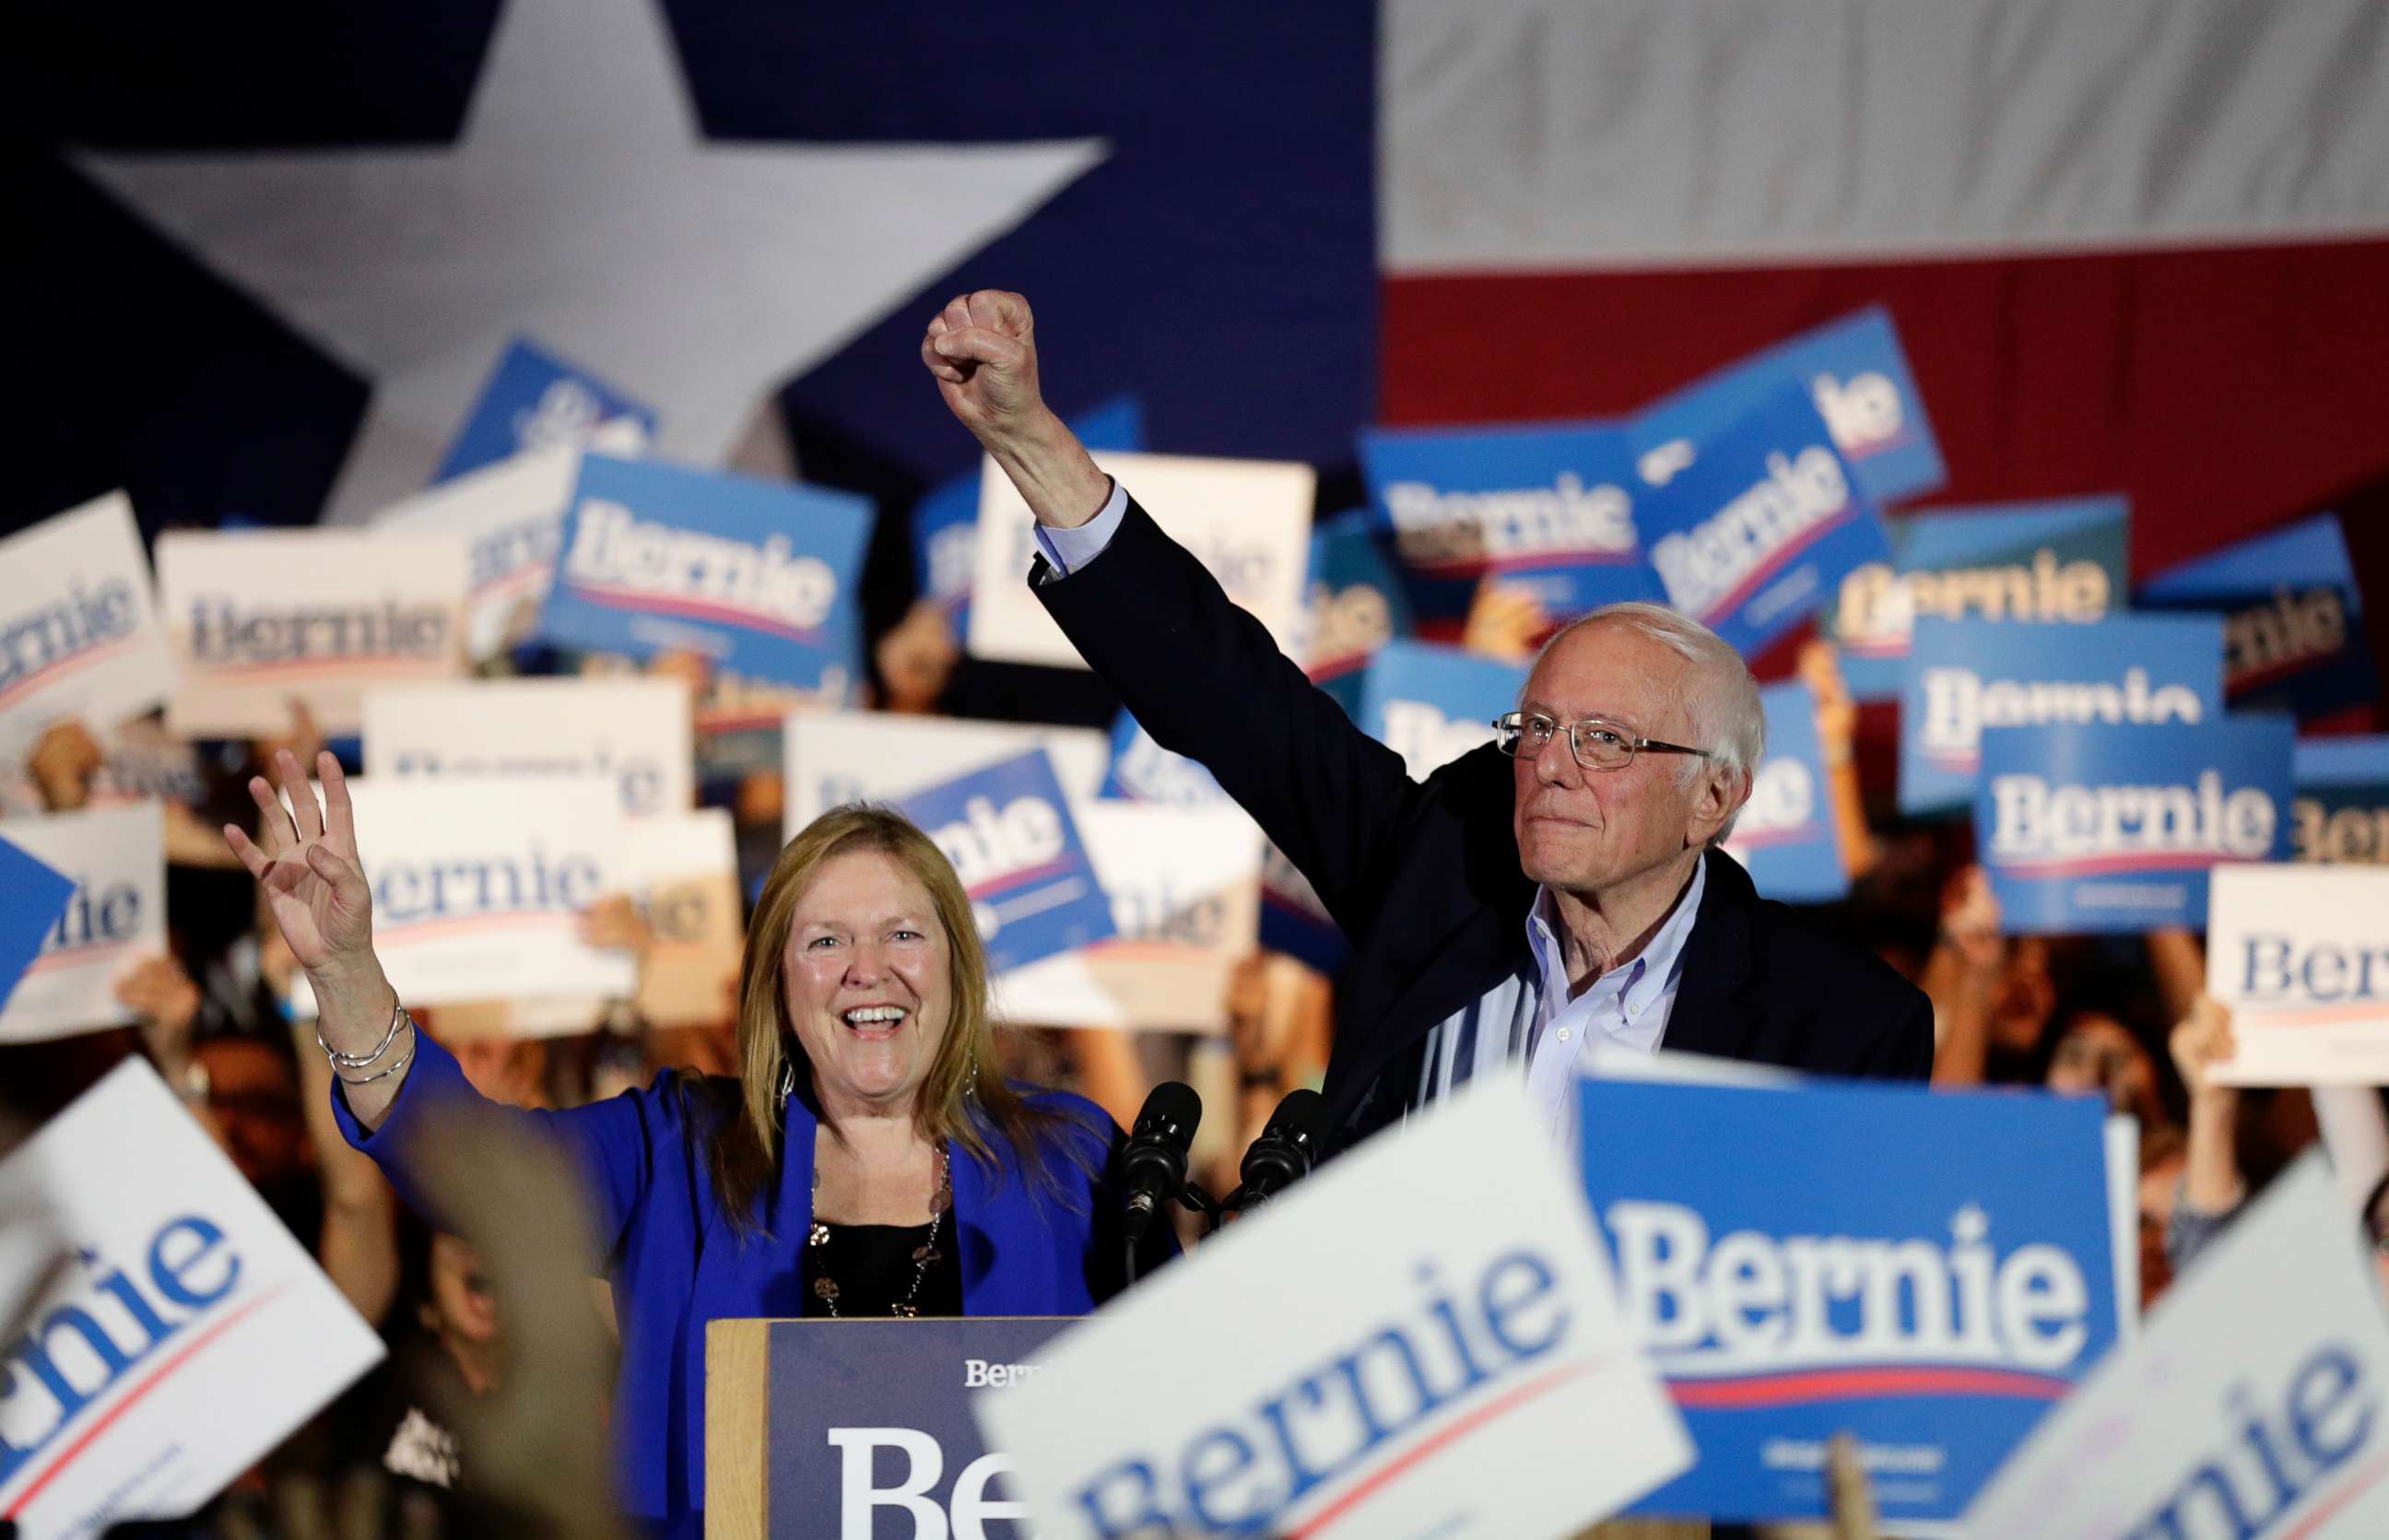 PHOTO: Democratic presidential candidate Sen. Bernie Sanders, I-Vt., right, with his wife Jane, raises his hand as he speaks during a campaign event in San Antonio, Feb. 22, 2020.